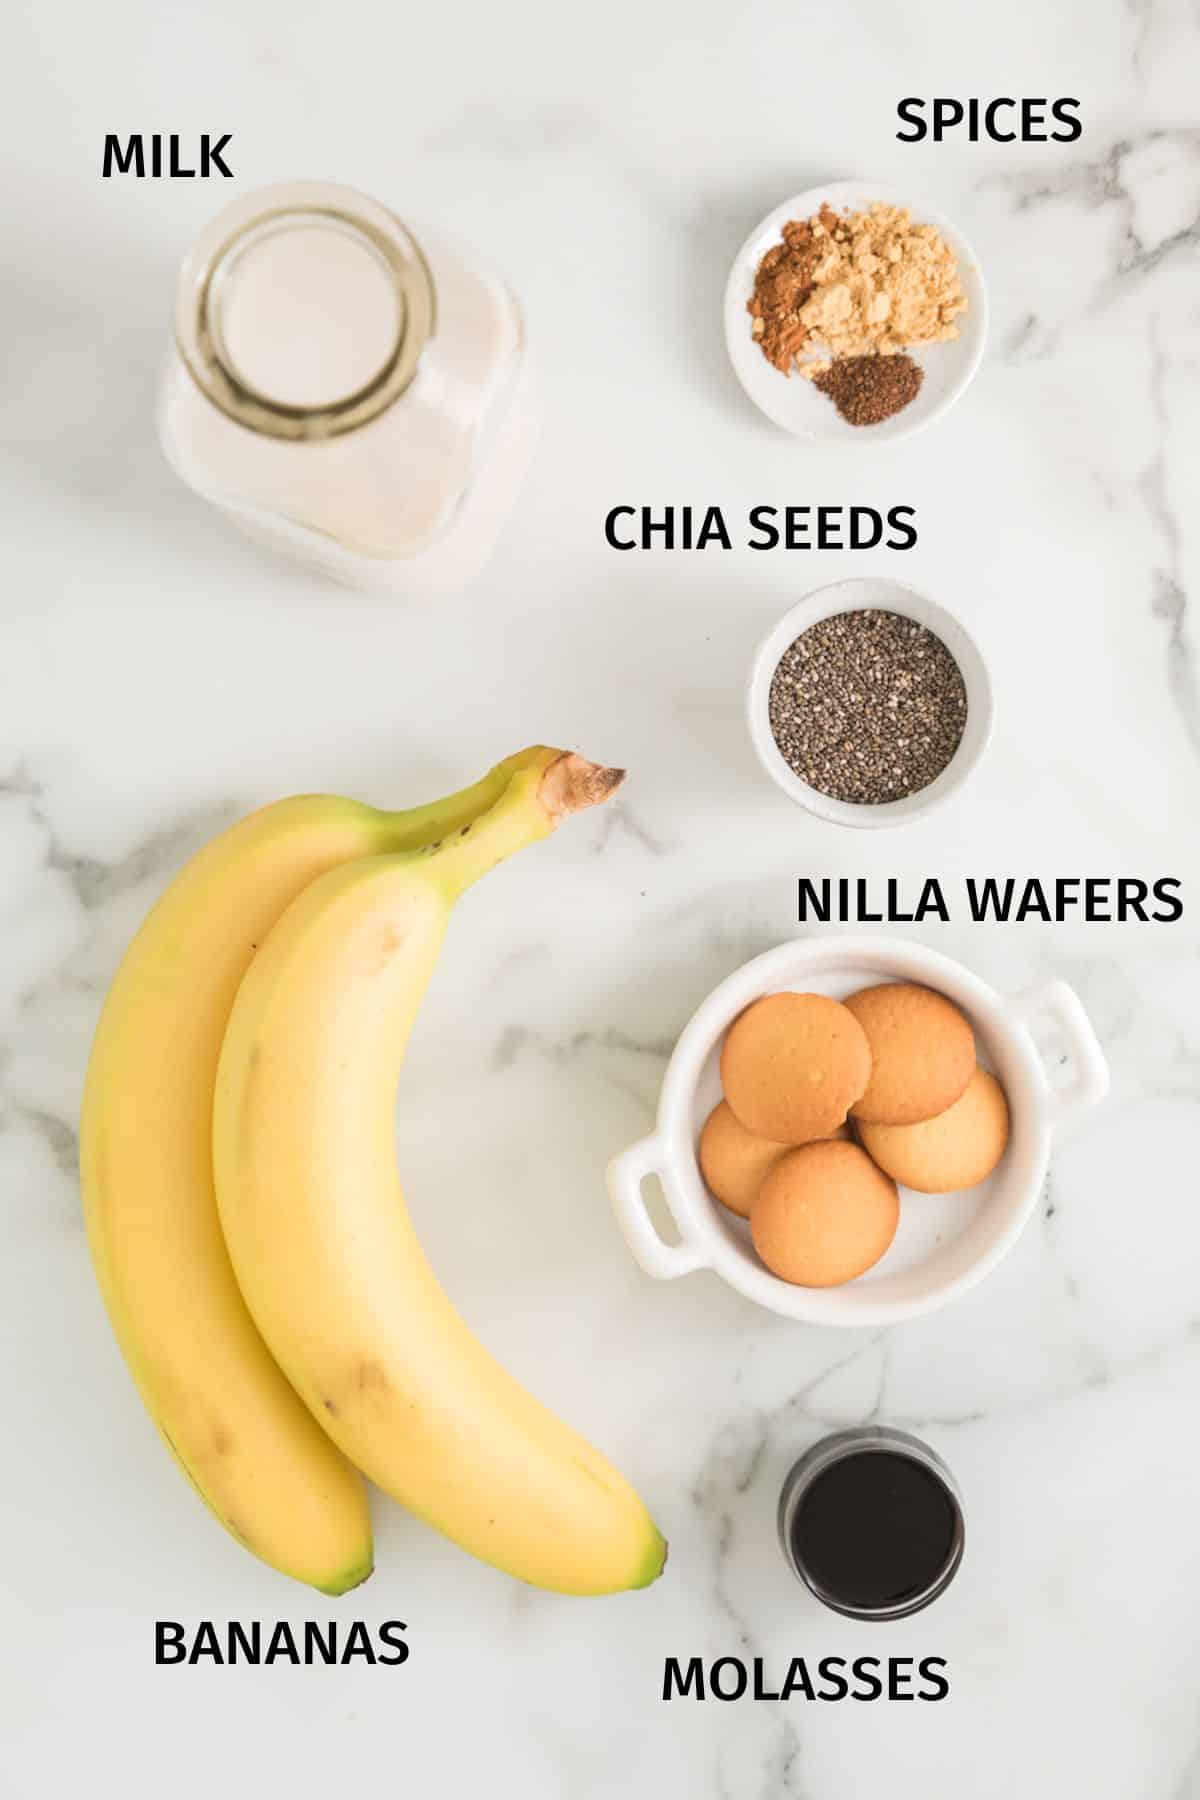 Ingredients to make a gingerbread smoothie in small bowls on a white surface.